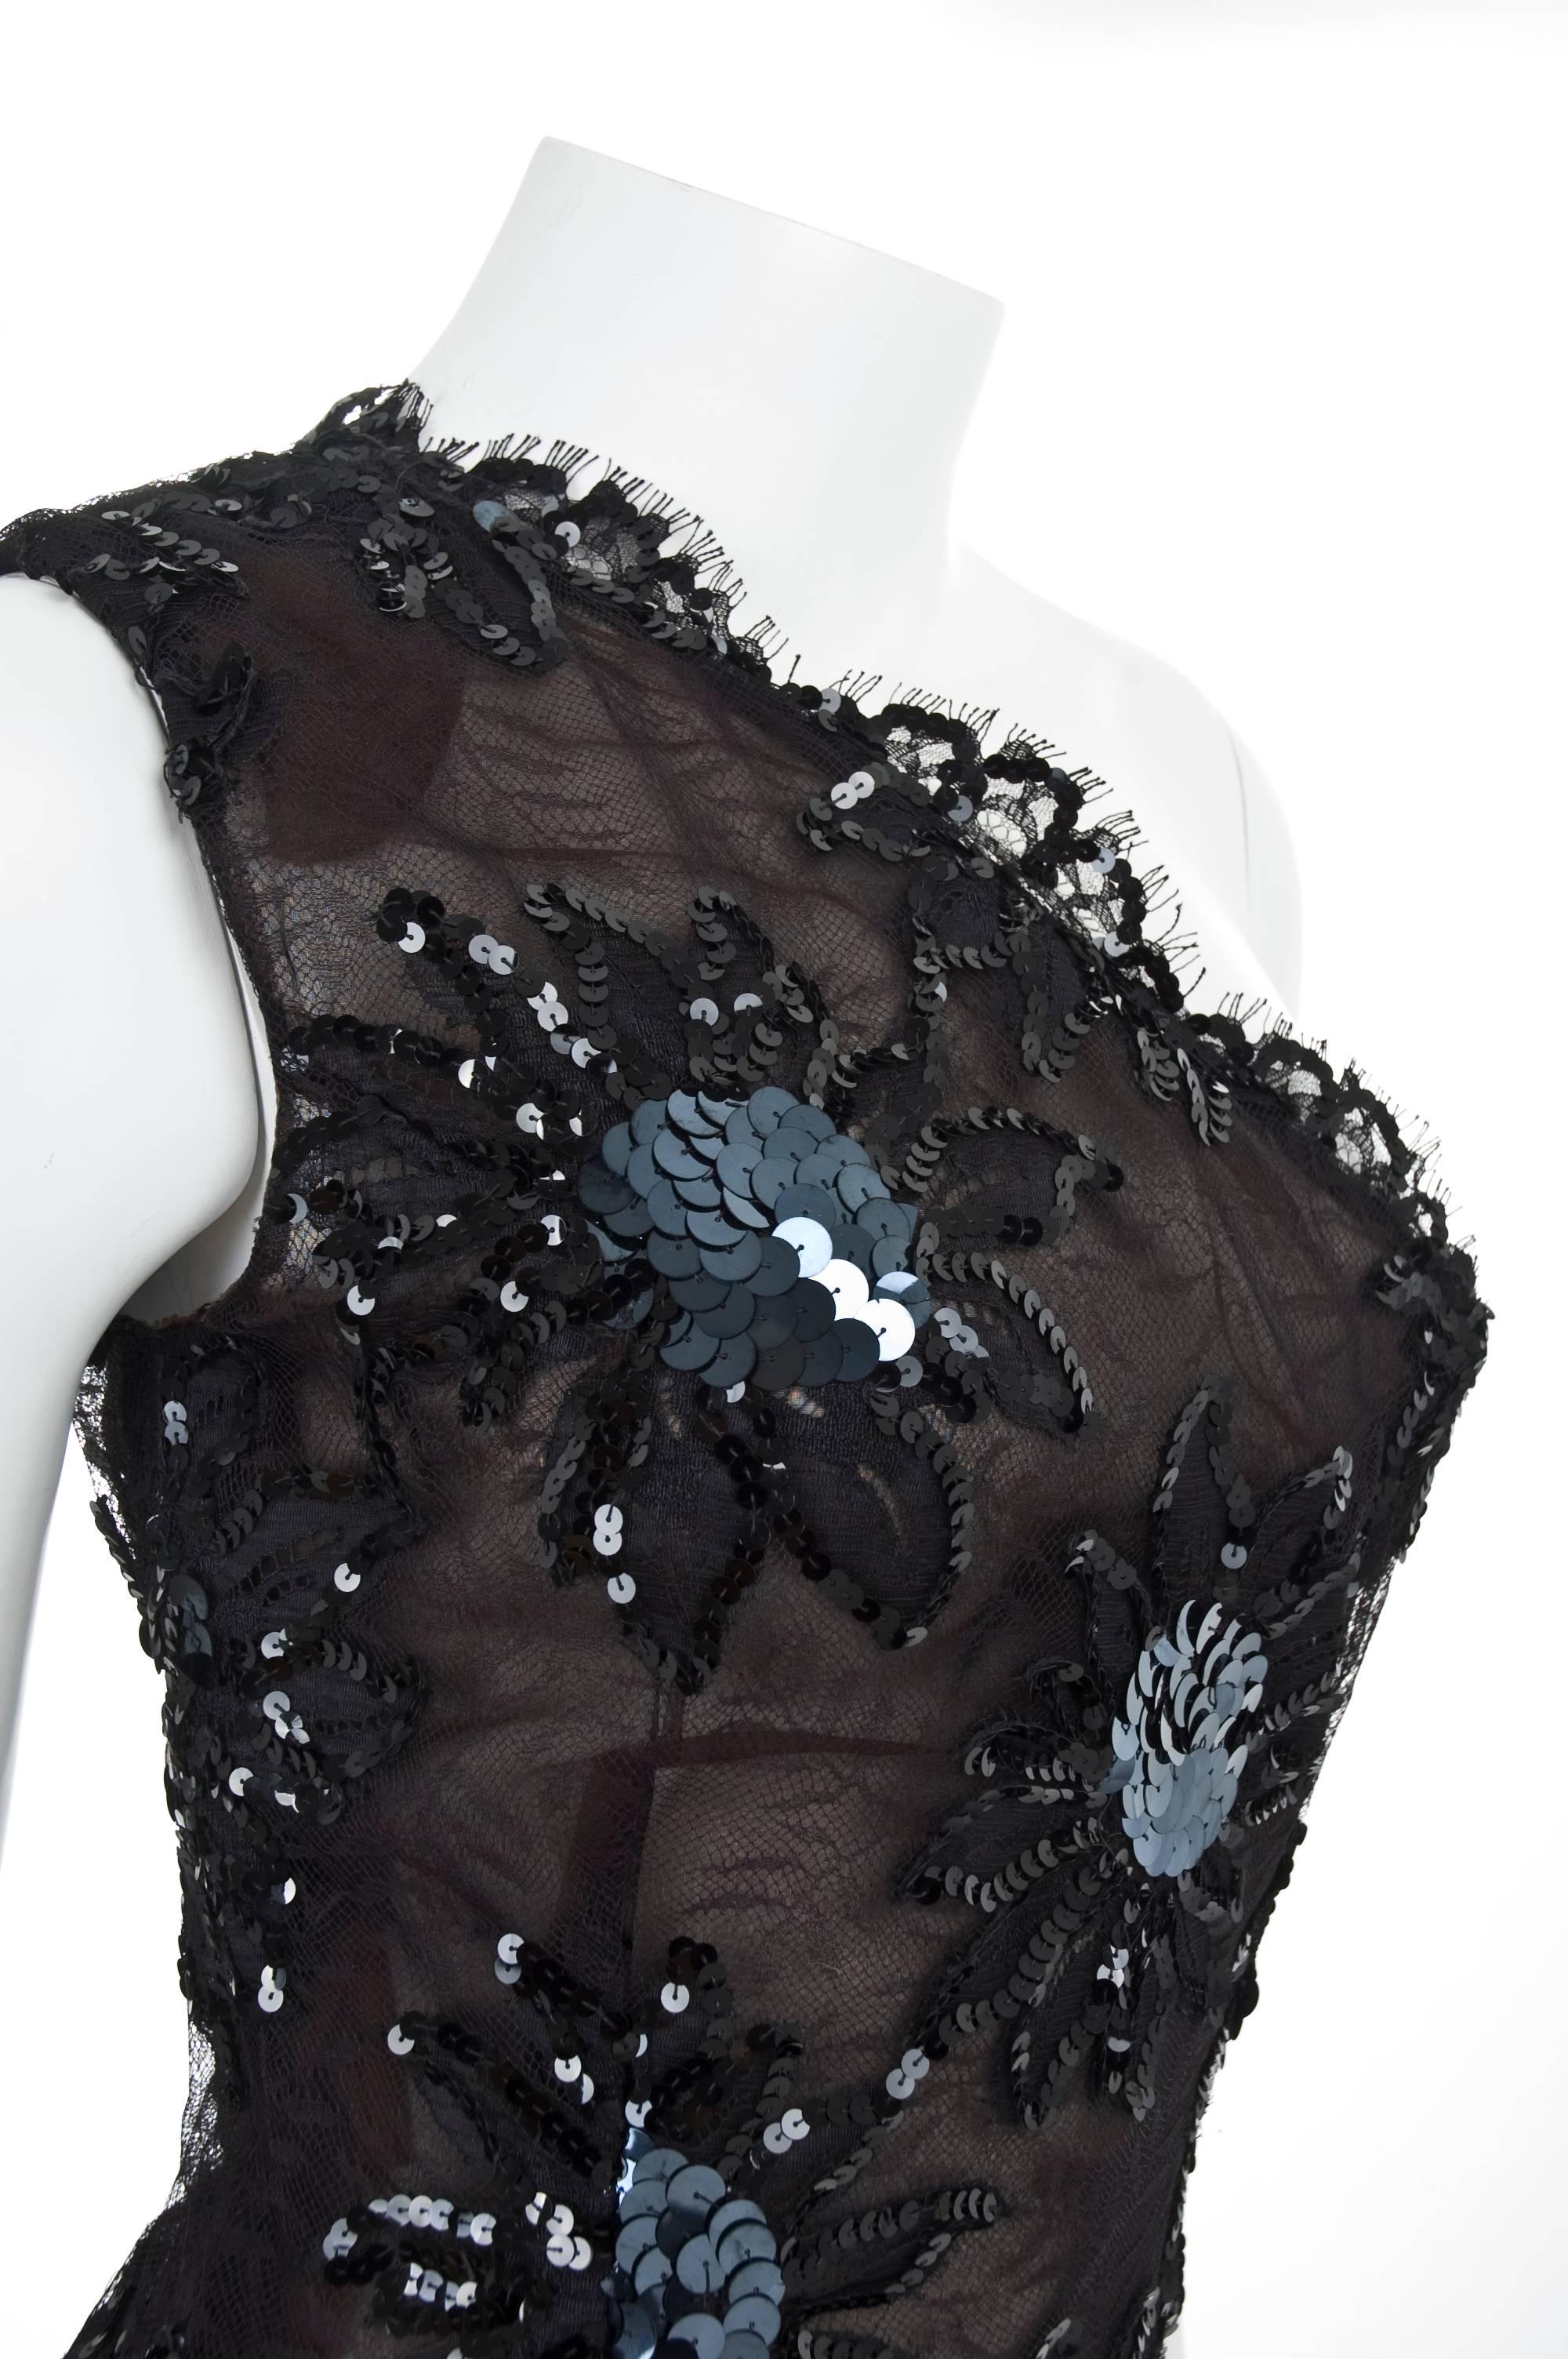 1987 Rare Yves Saint Laurent Cocktail Dress in Black Lace and Sequins  In Excellent Condition For Sale In Hamburg, Deutschland